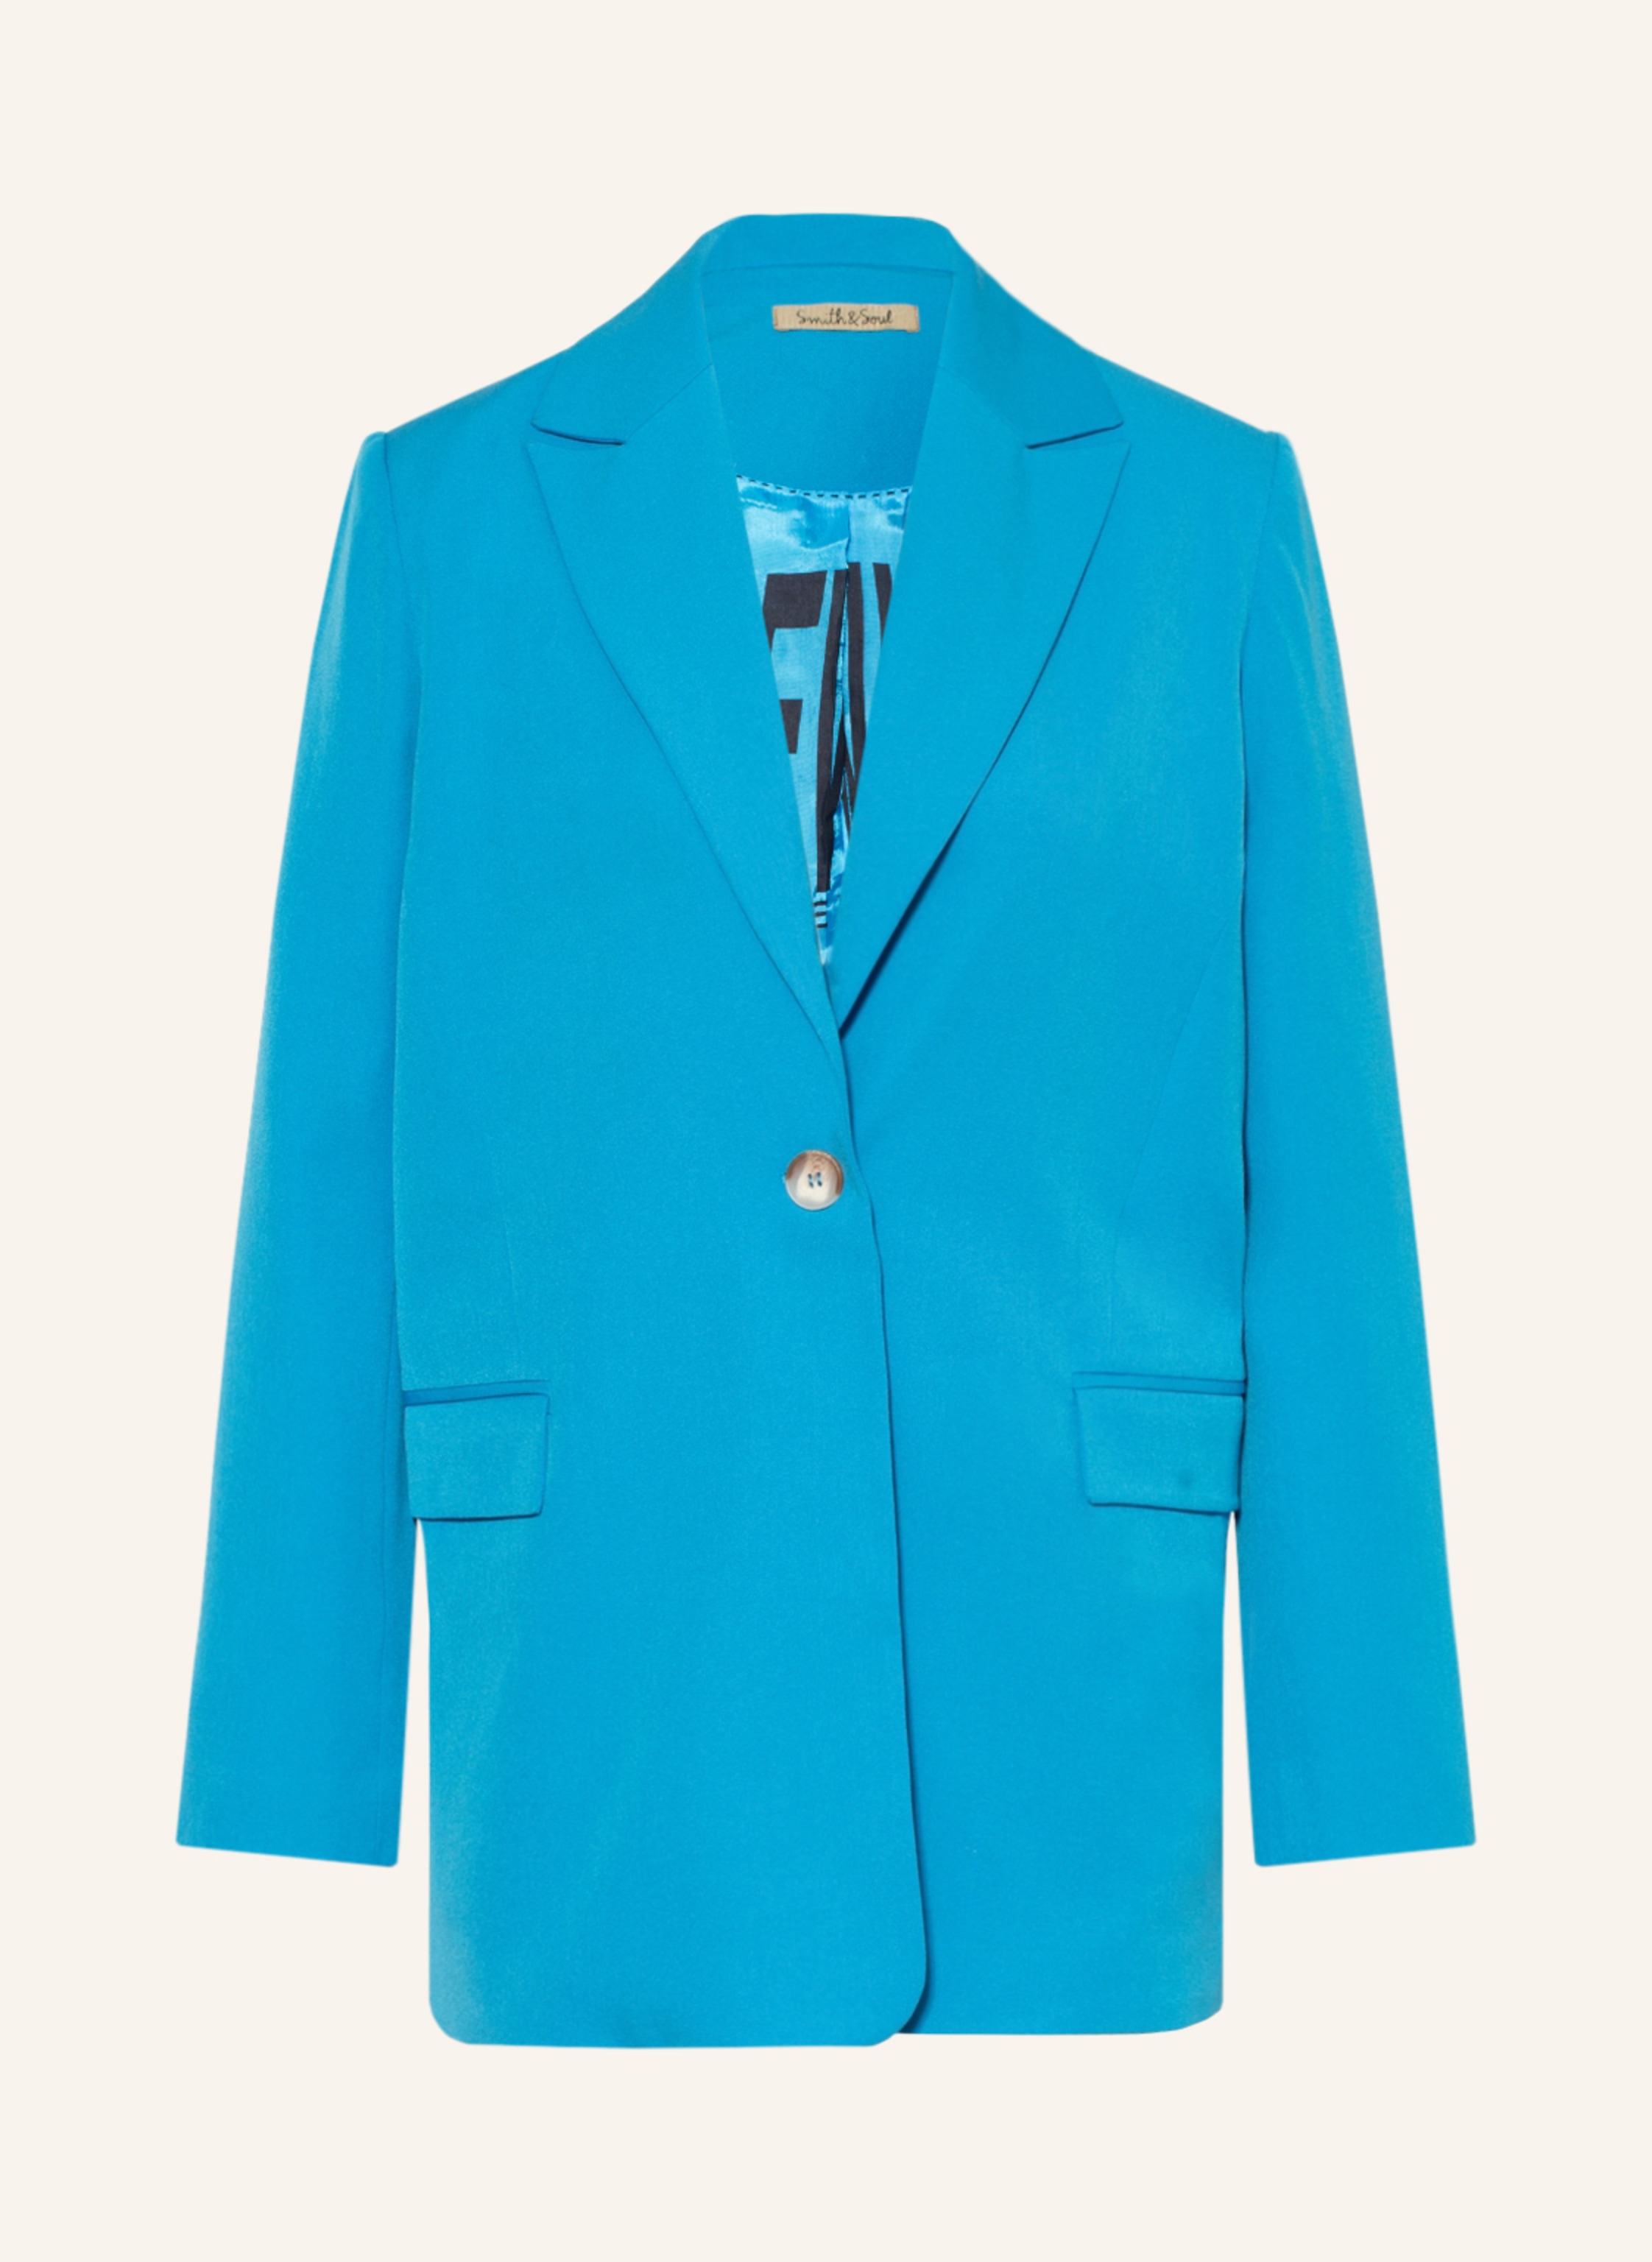 Smith & Soul Blazer in turquoise